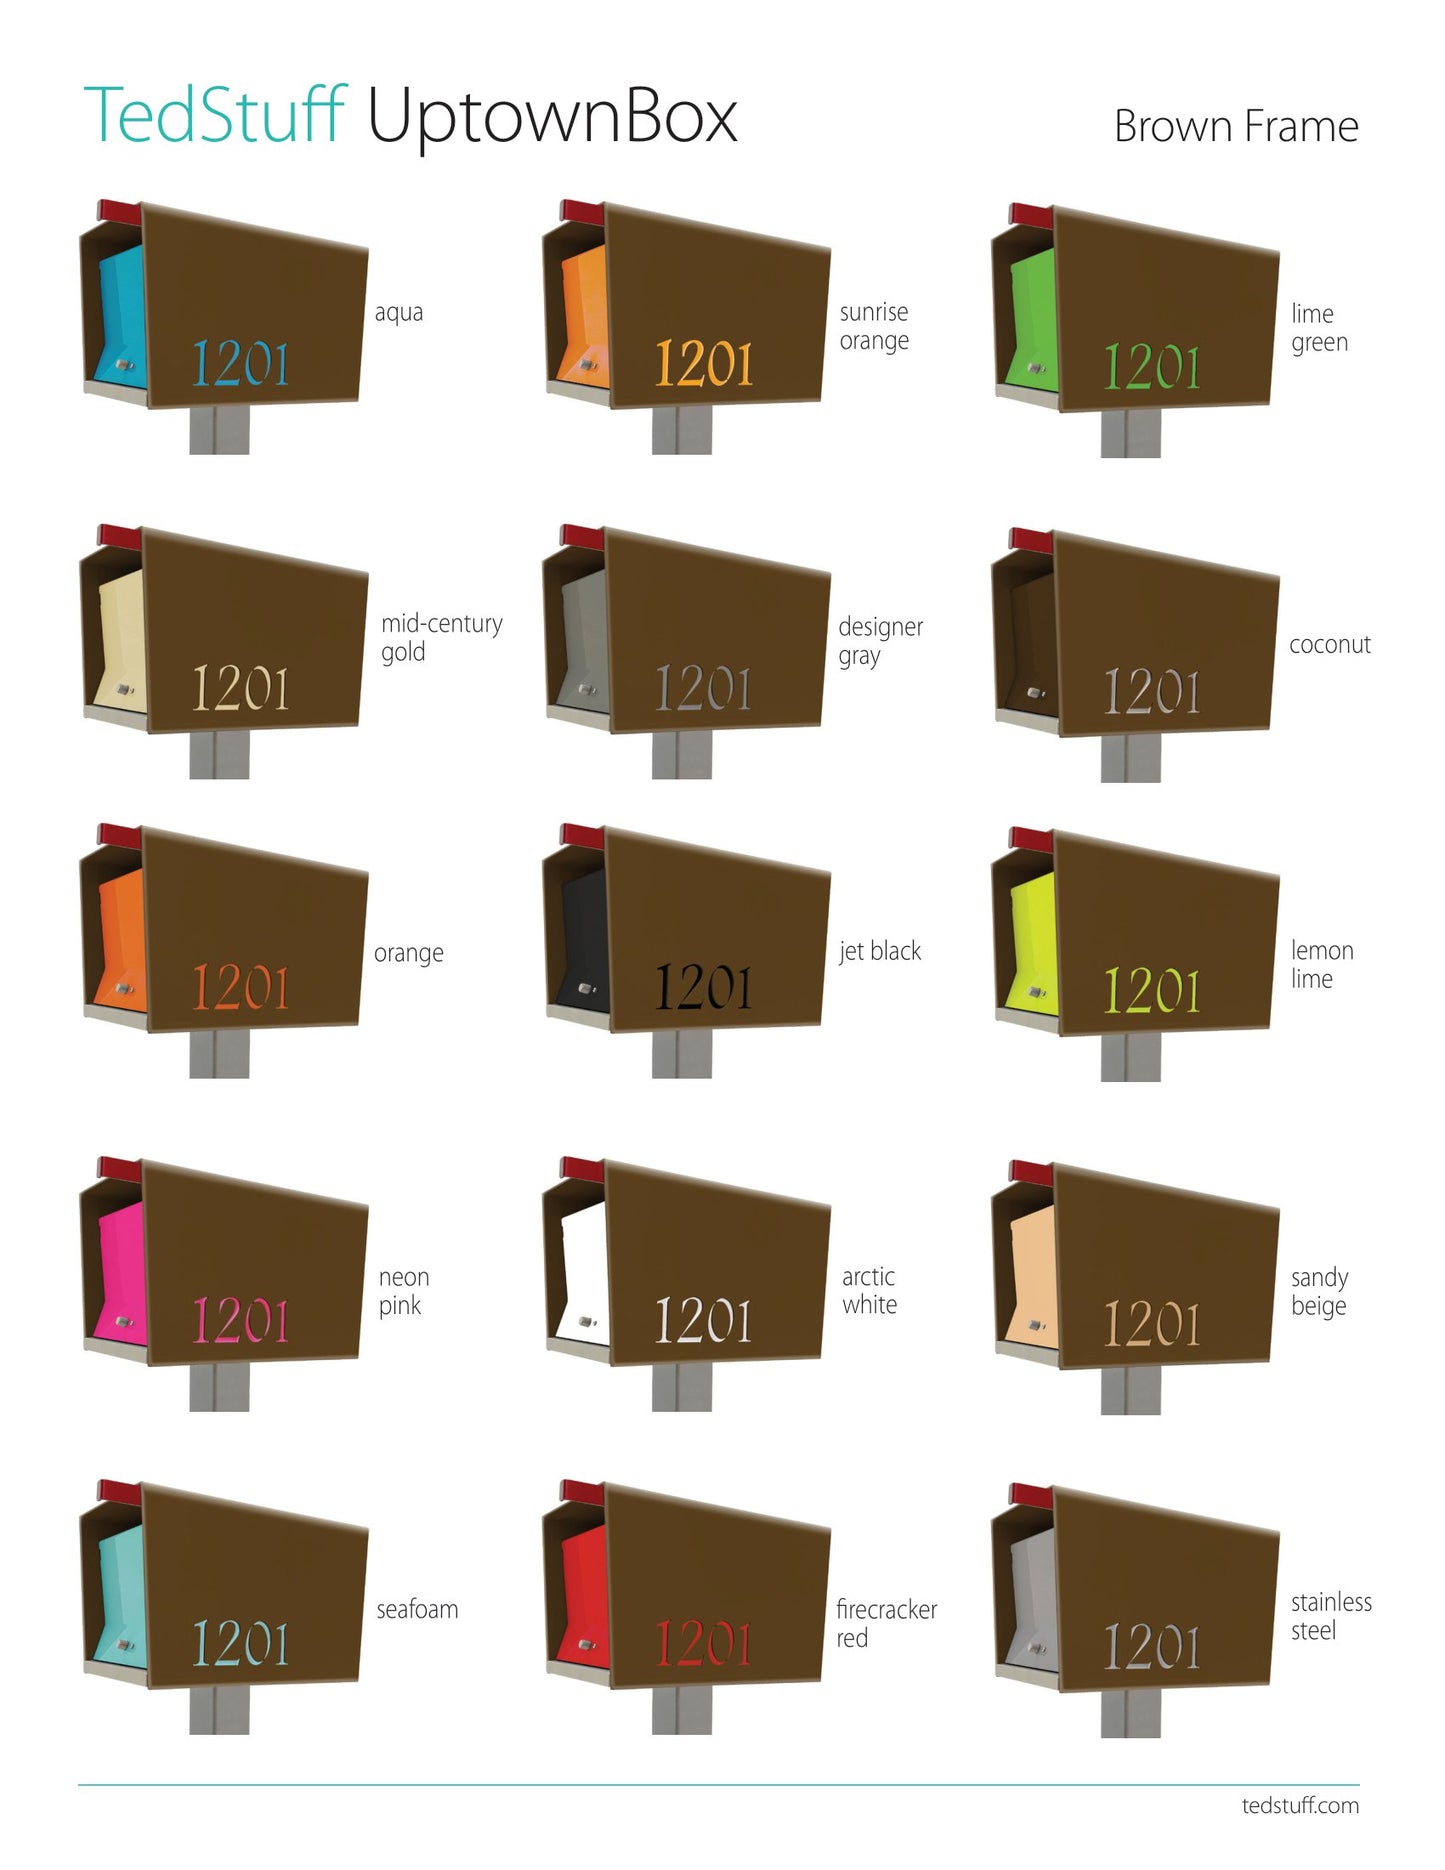 The Original UptownBox modern mailbox in Brown Frame color guides